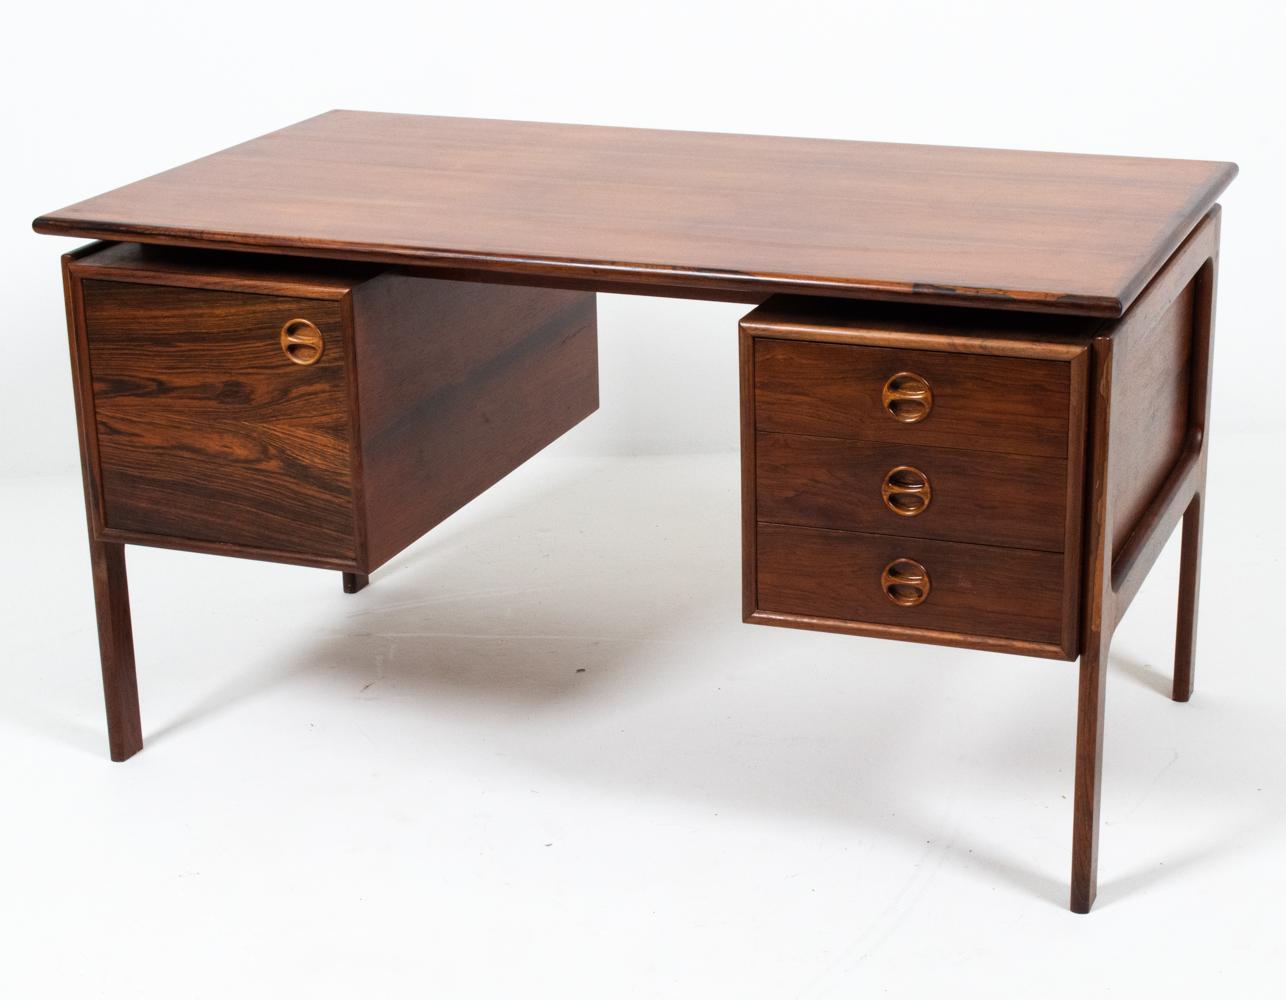 Perfectly proportioned for apartment living, this exquisite desk by Arne Vodder features a classic Mid-Century 